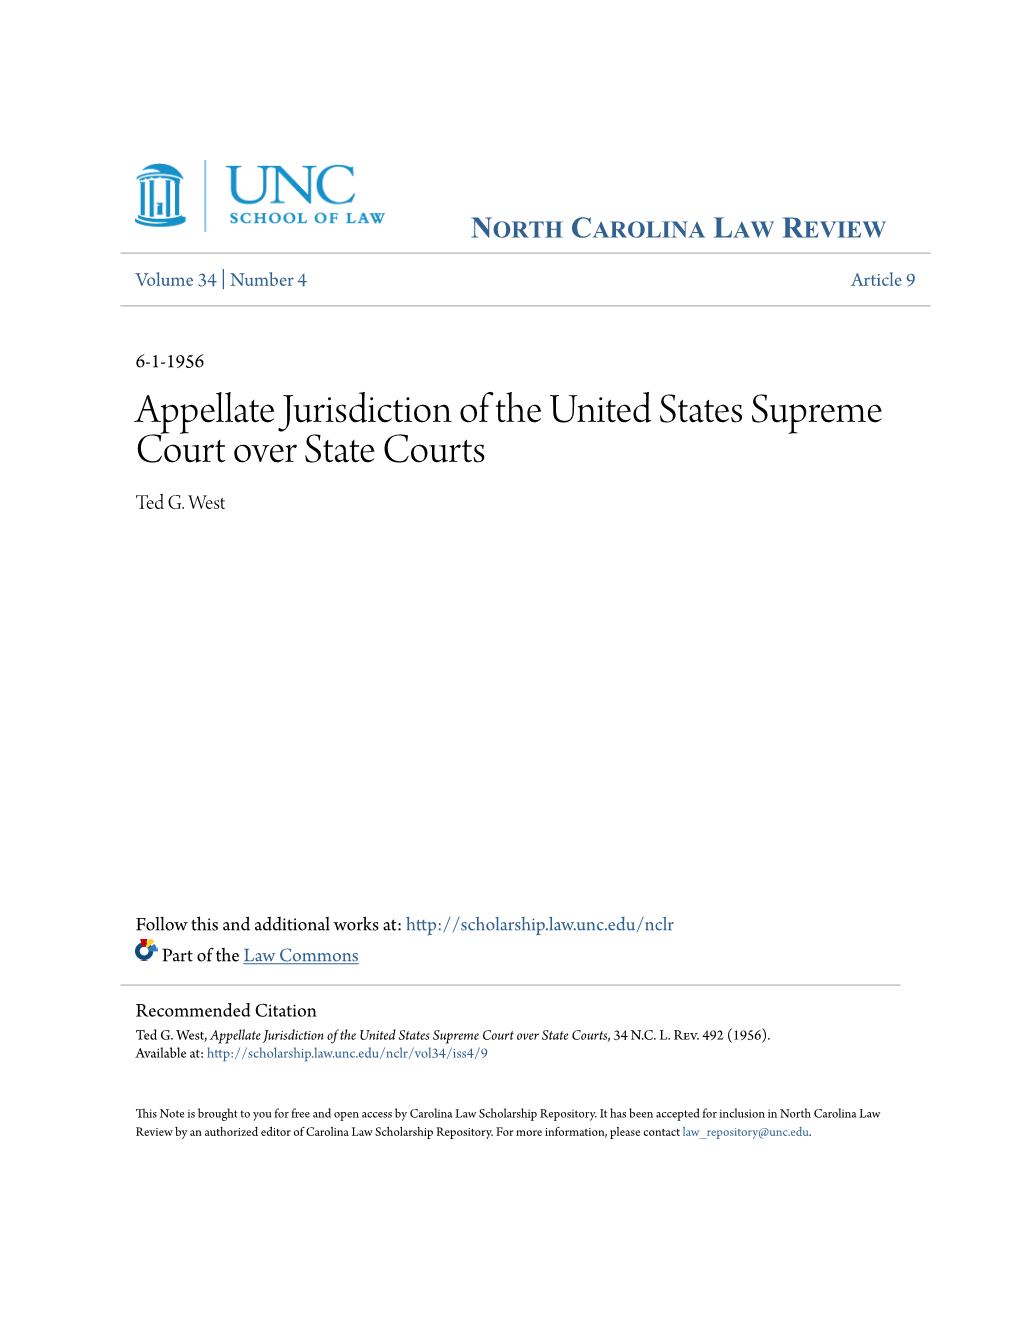 Appellate Jurisdiction of the United States Supreme Court Over State Courts Ted G